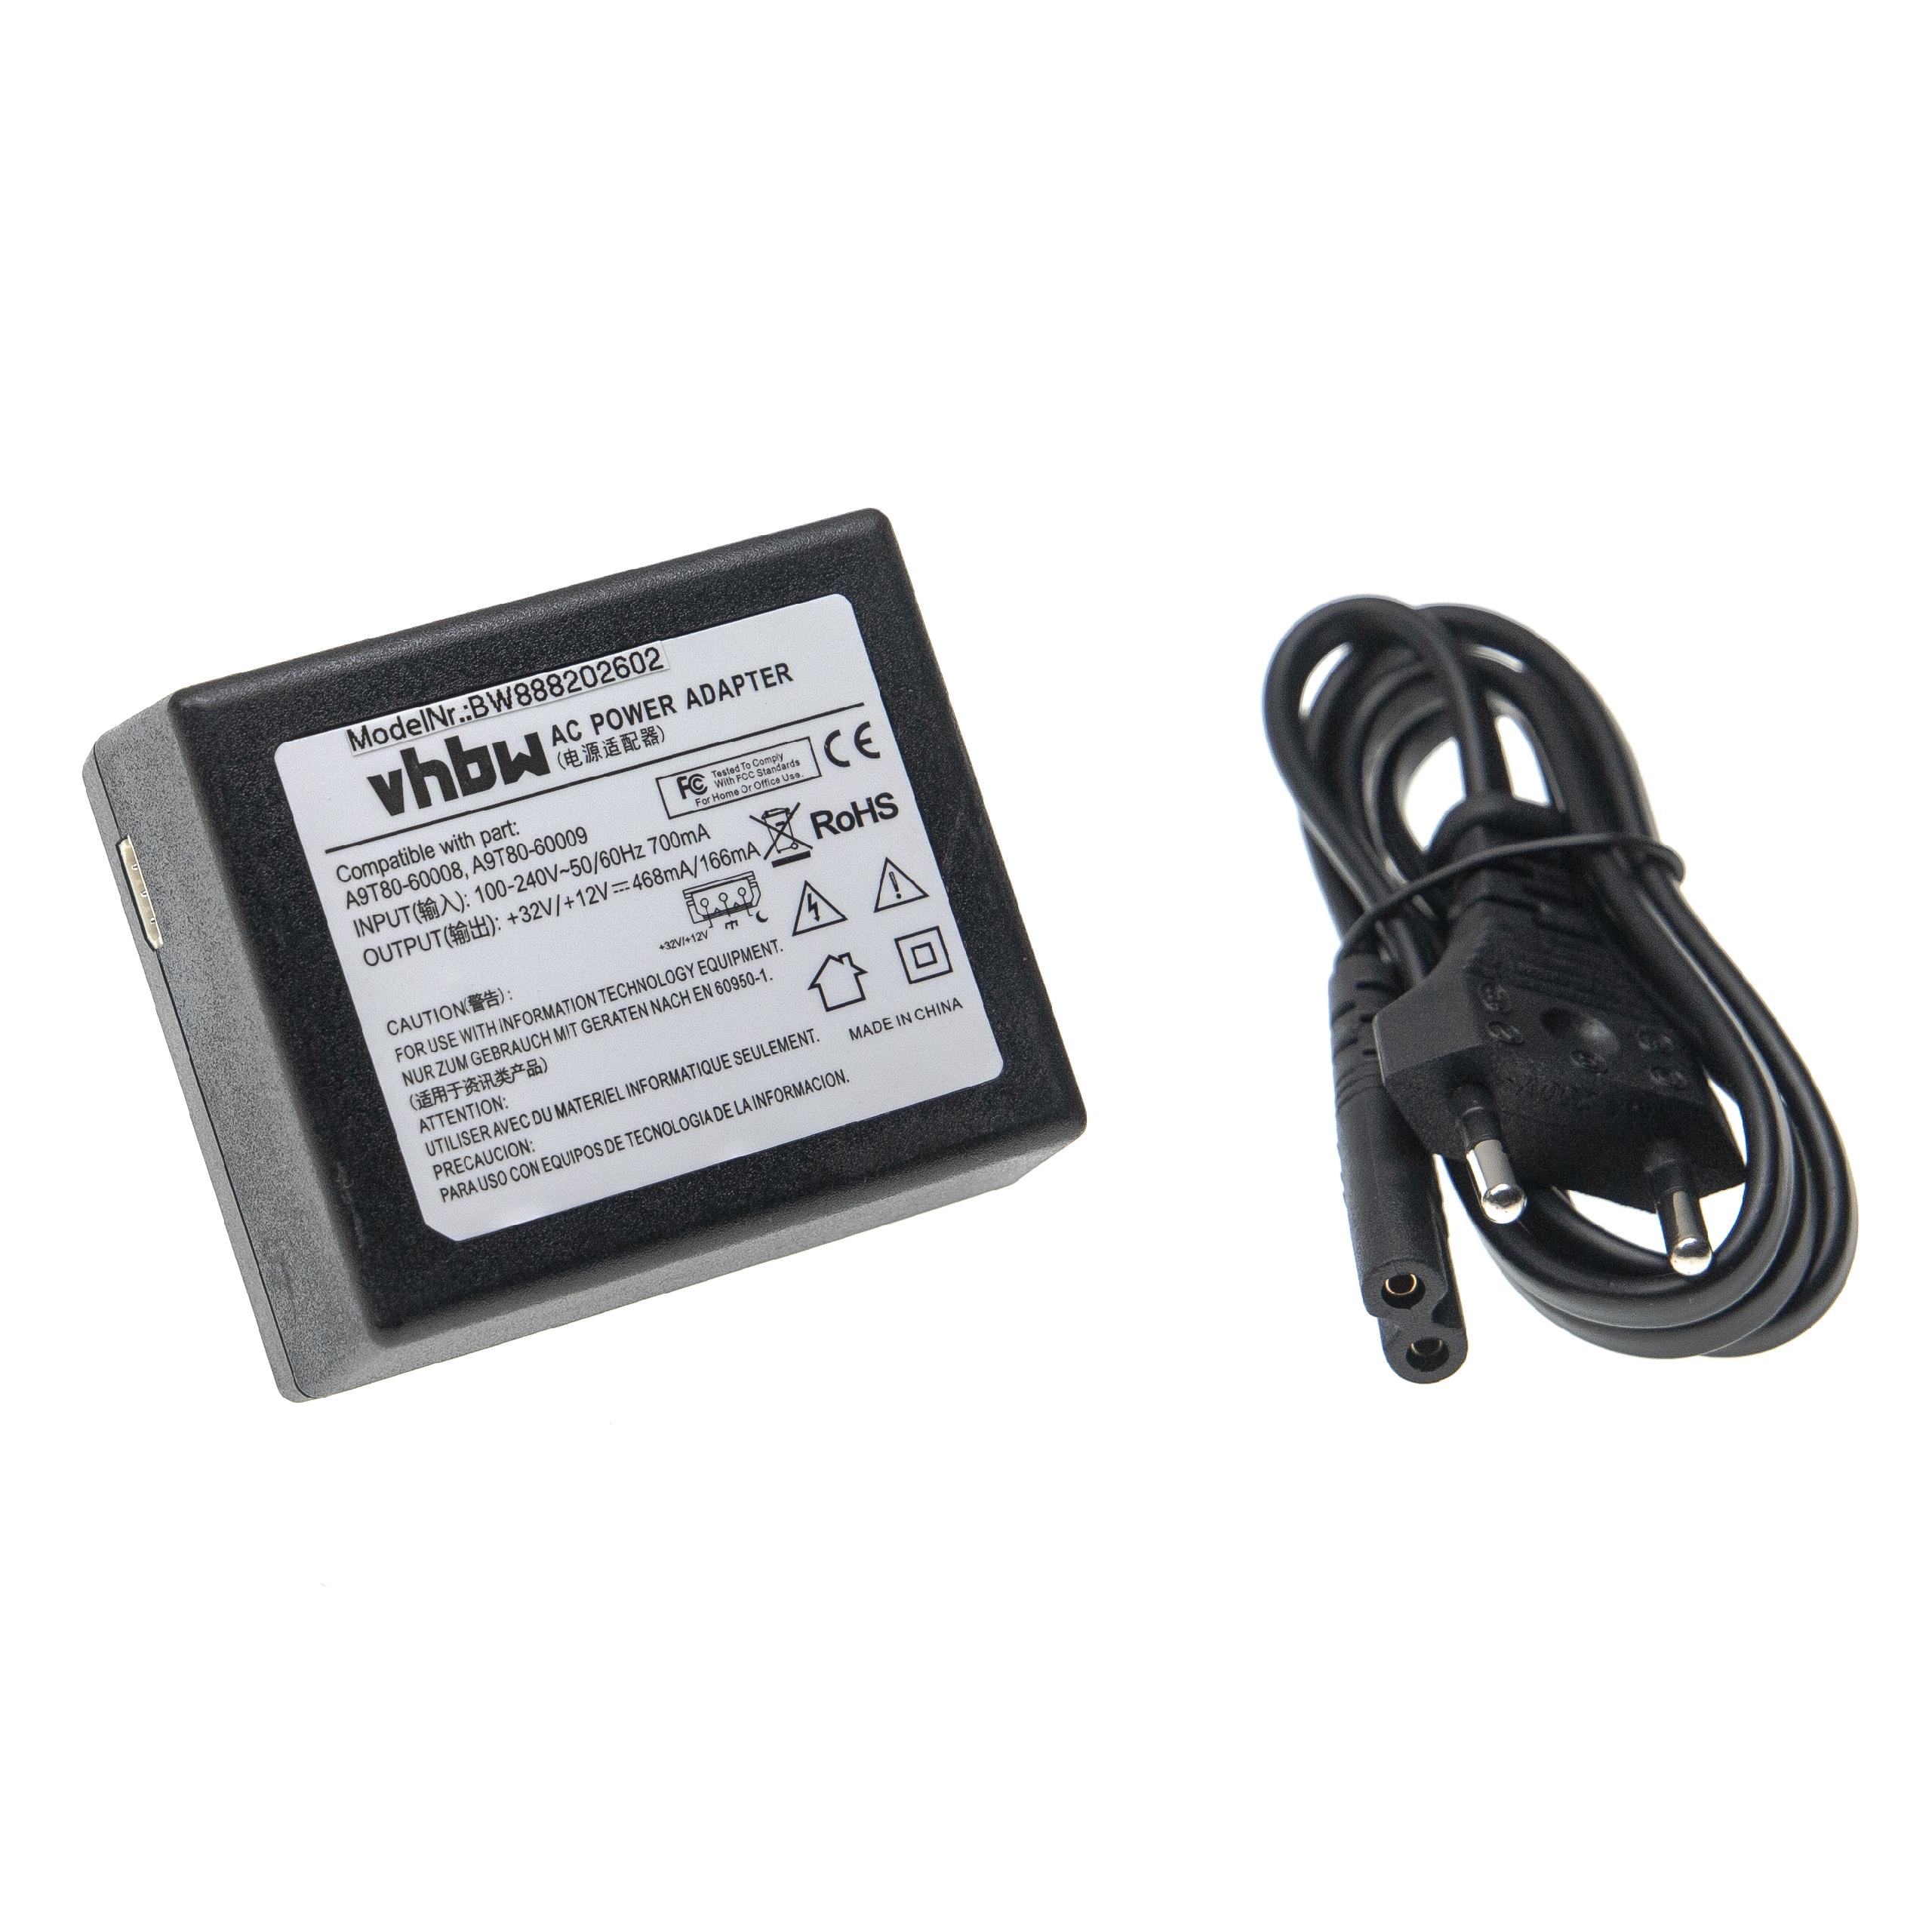 Mains Power Adapter replaces HP E4W39-60047, A9T80-60008, A9T80-60009, CQ191-60018 for Printer